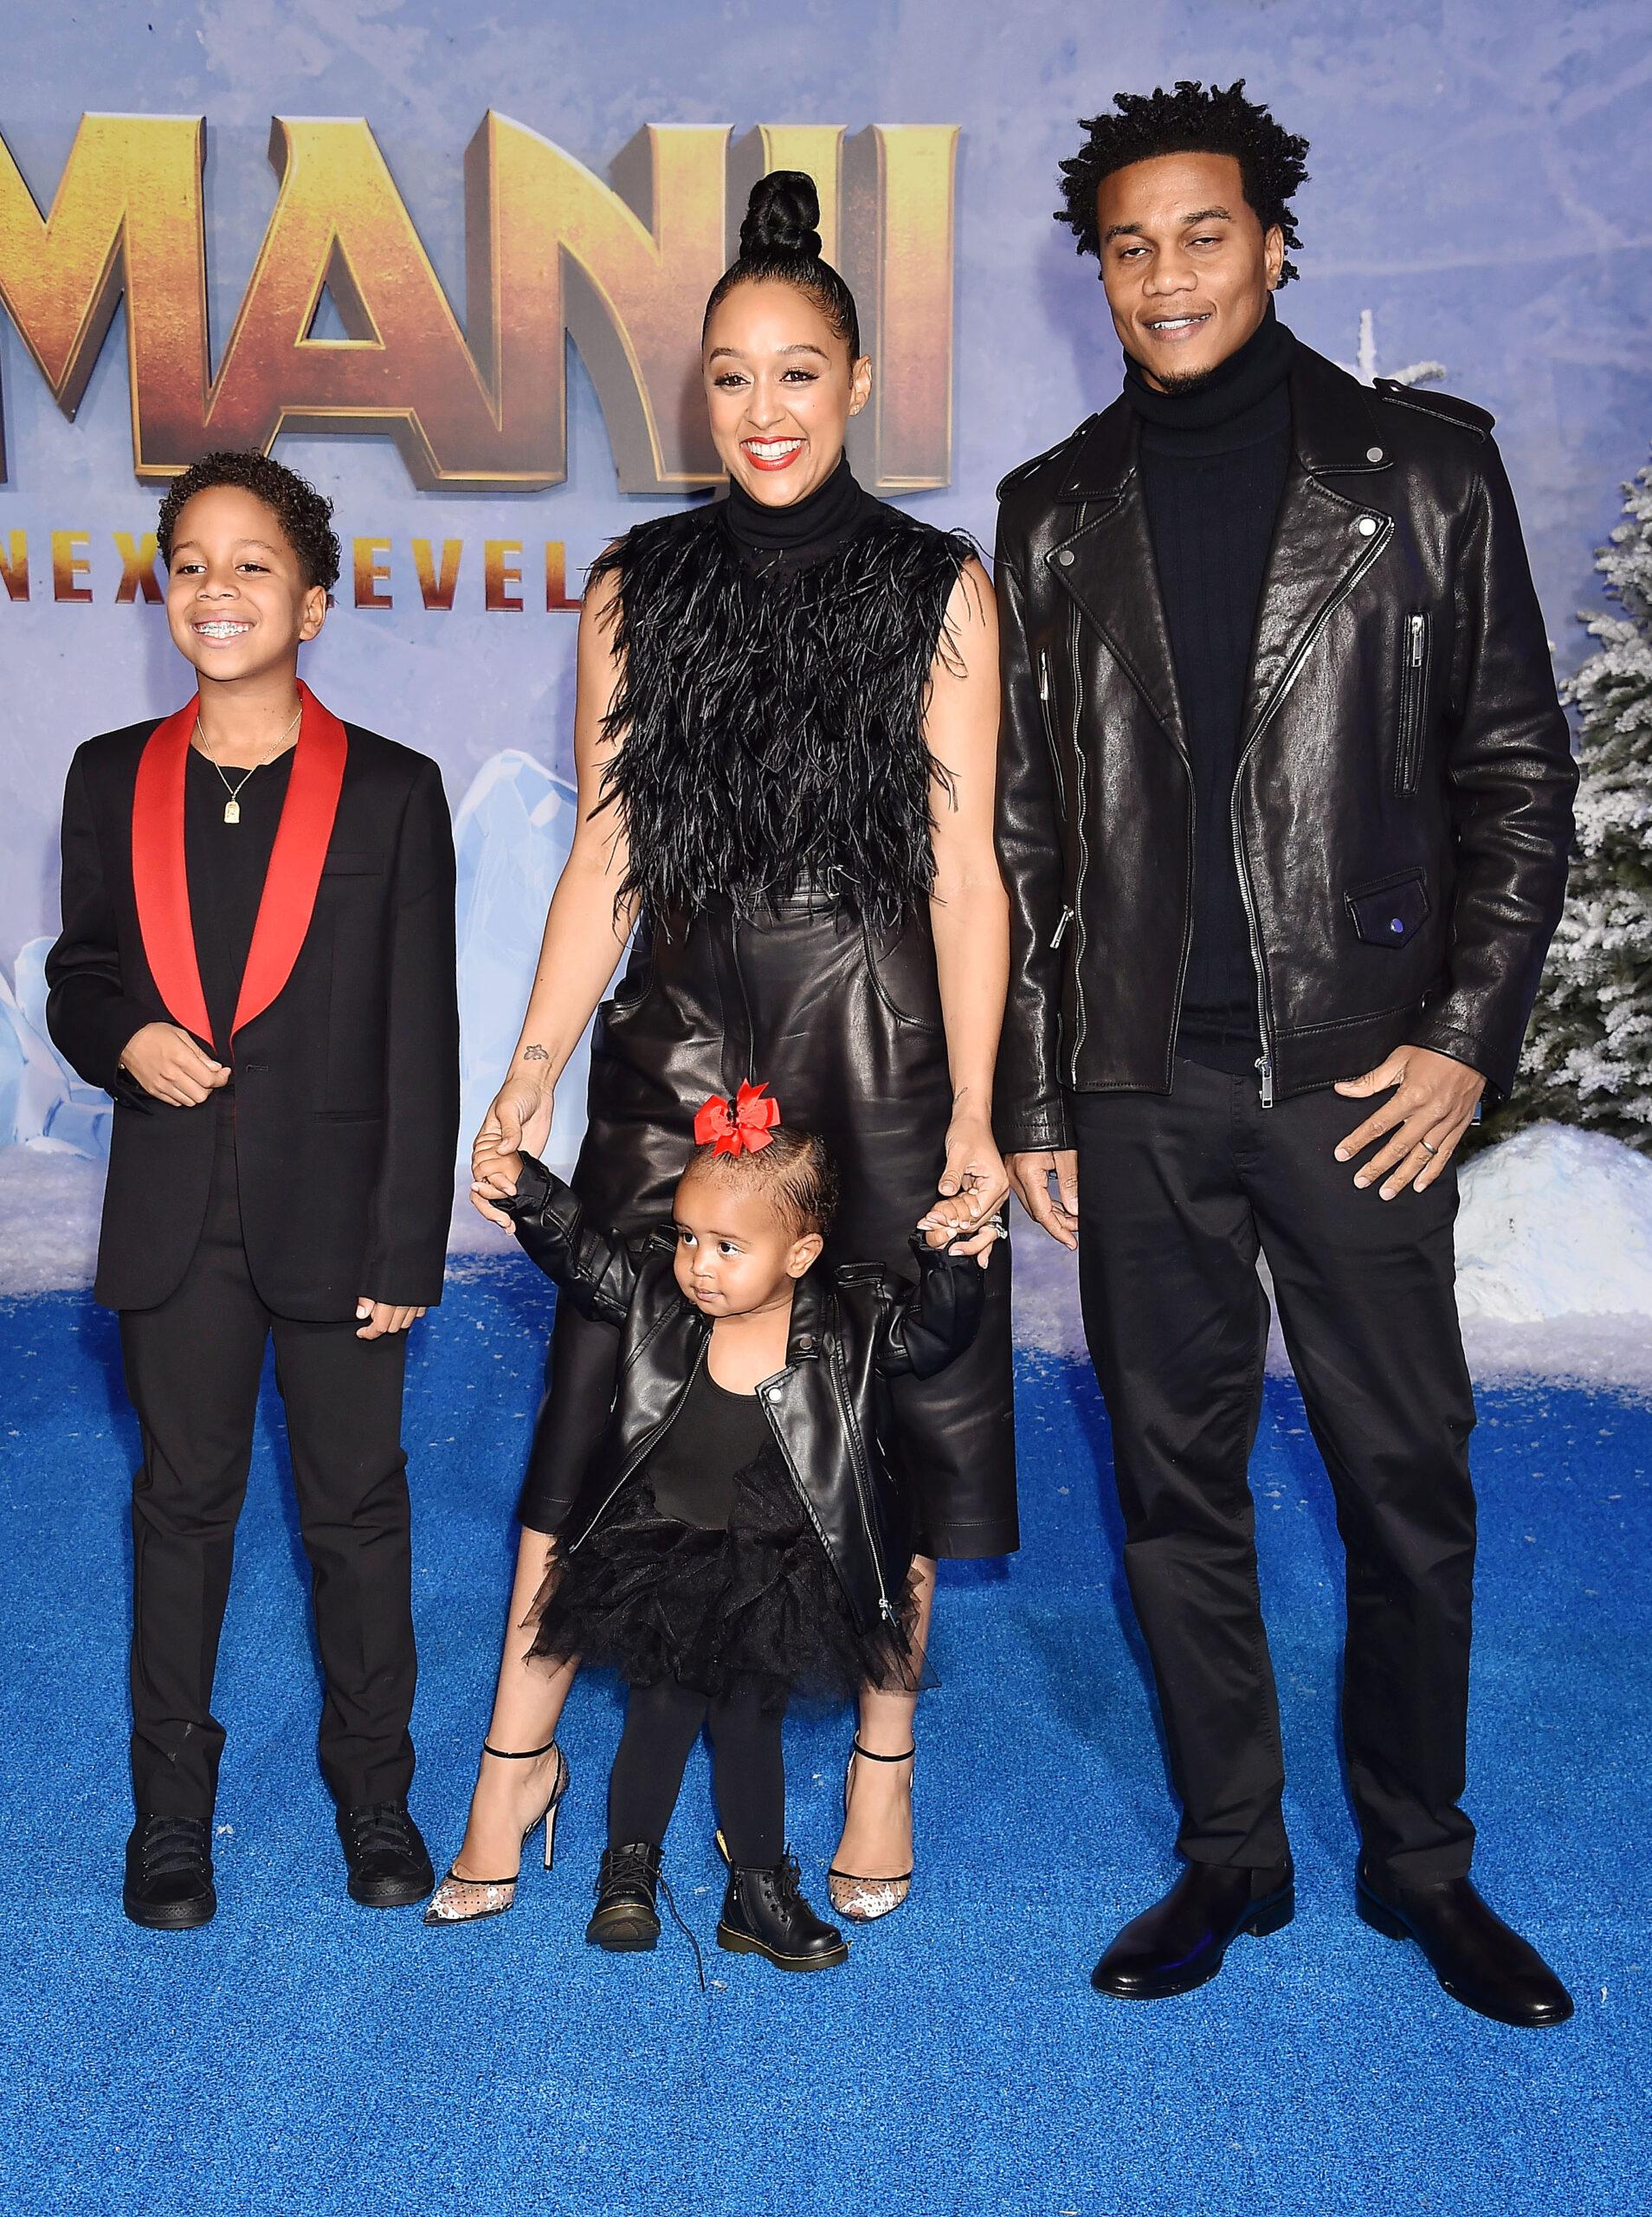 Tia Mowry and Cory Hardrict with their children at premiere of "Jumanji: The Next Level"